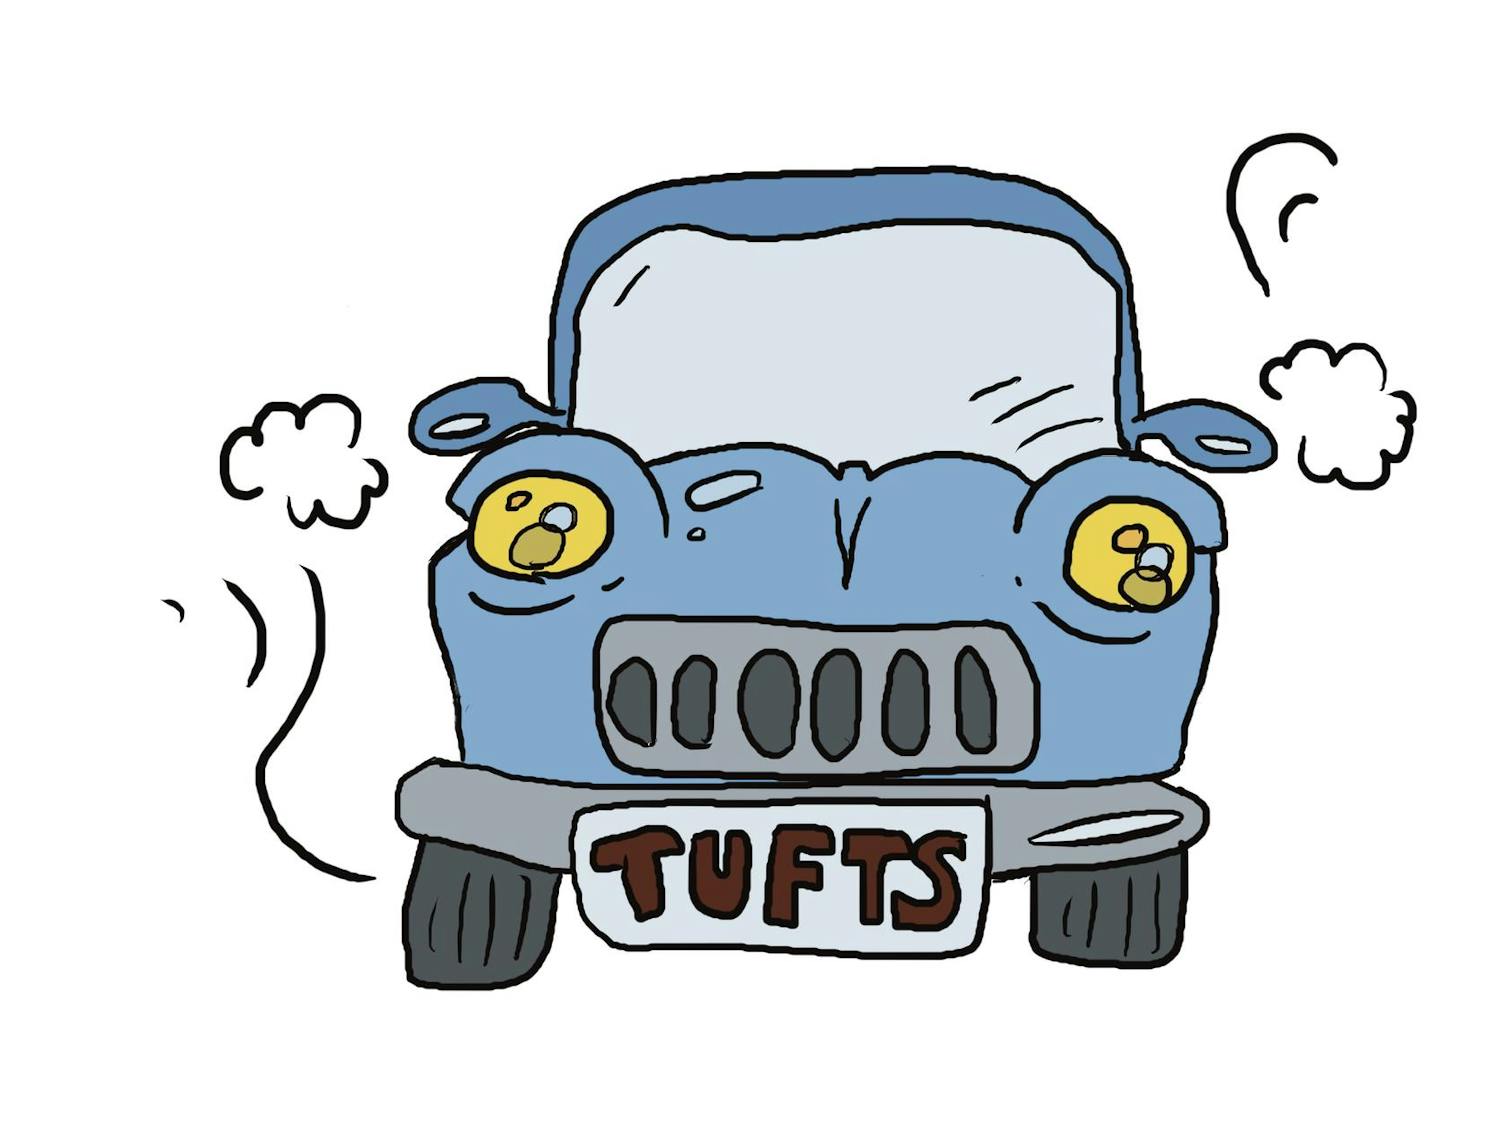 Roadtrips from Tufts Graphic